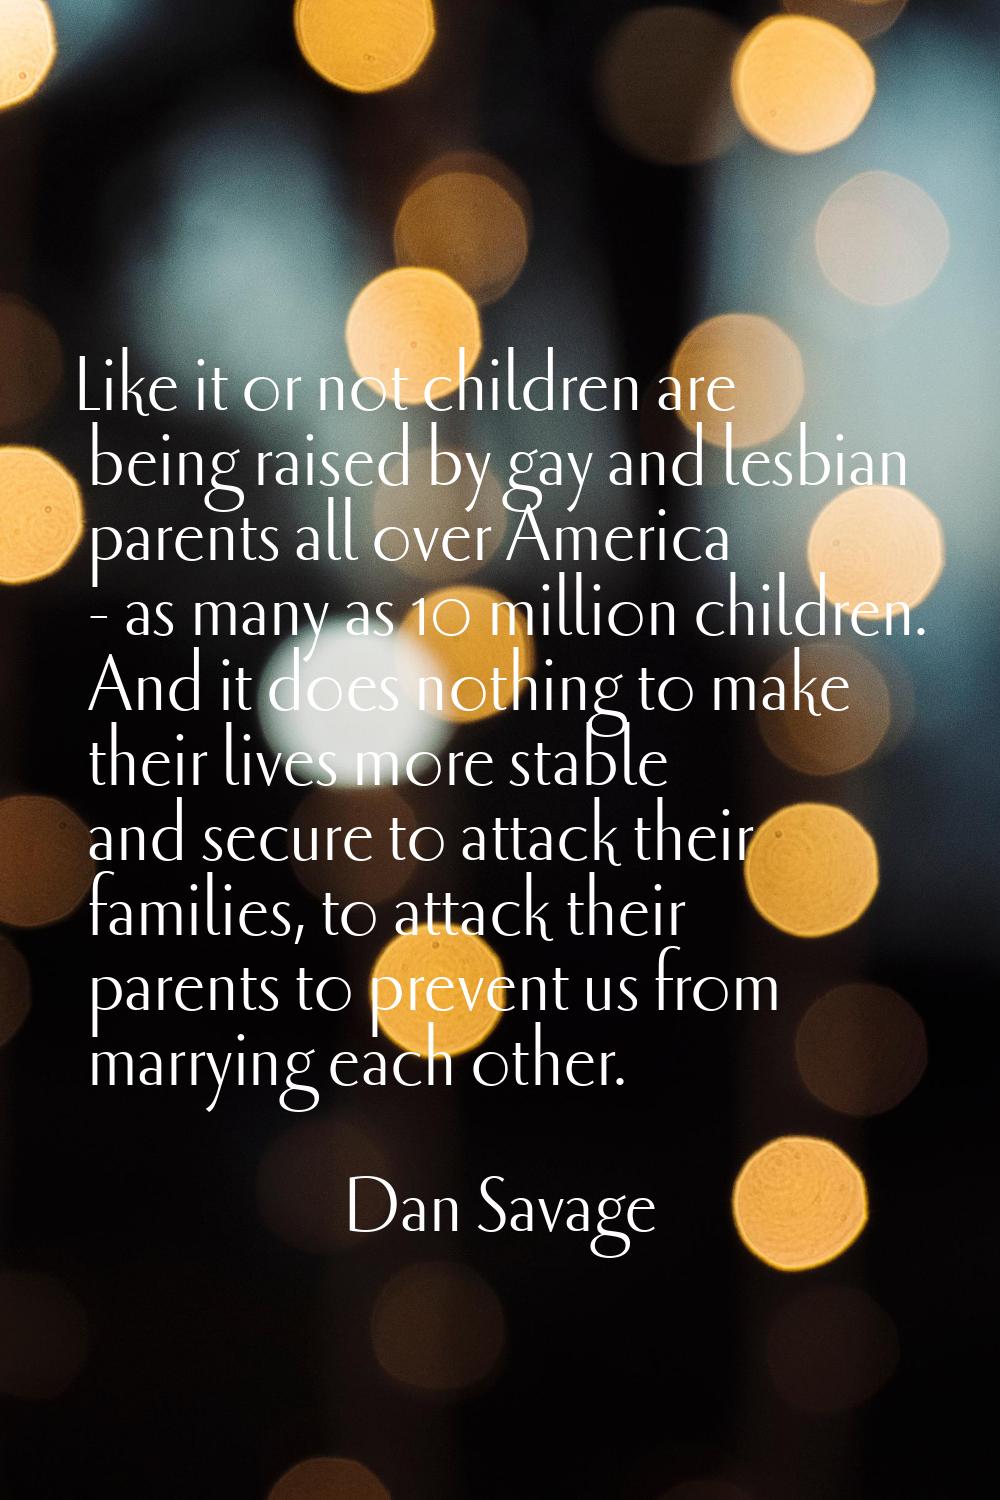 Like it or not children are being raised by gay and lesbian parents all over America - as many as 1